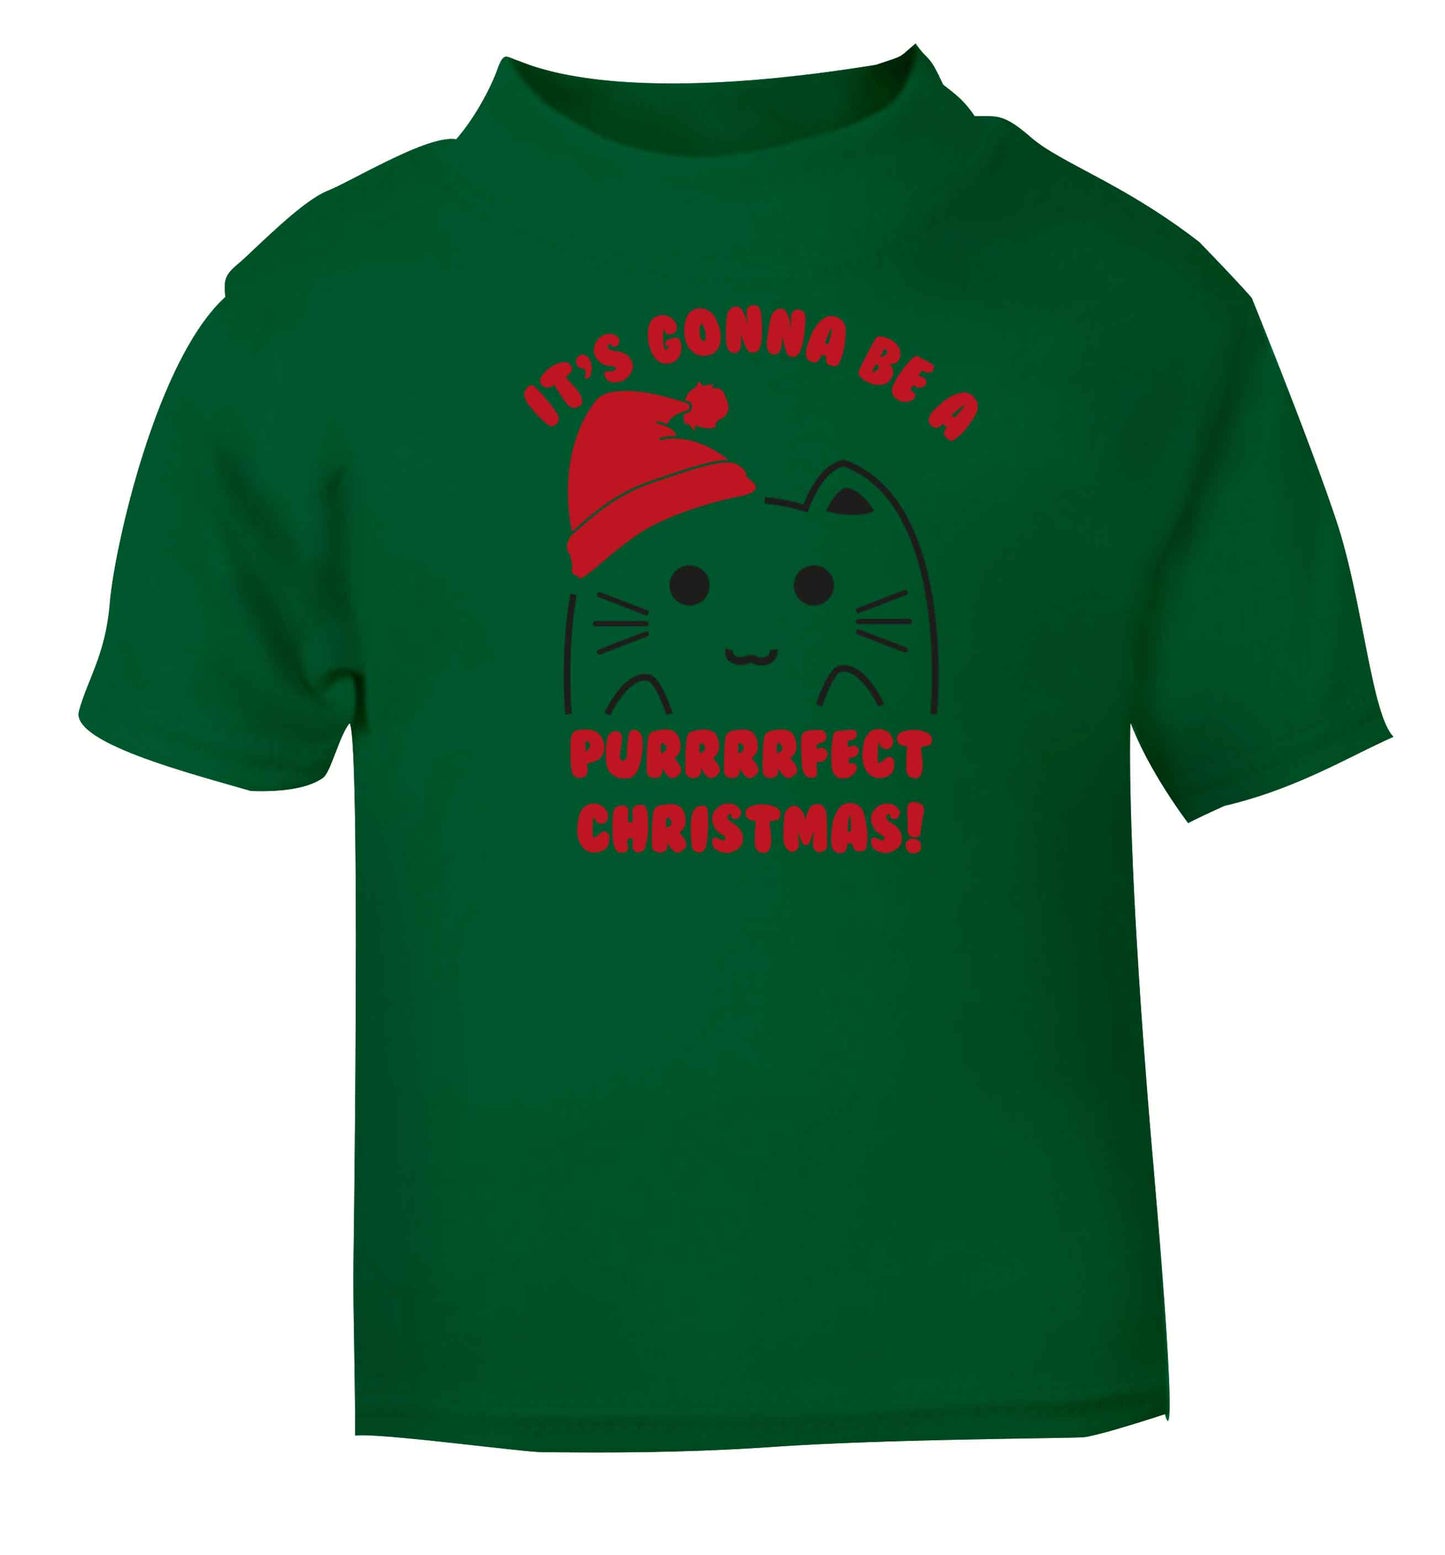 It's going to be a purrfect Christmas green baby toddler Tshirt 2 Years